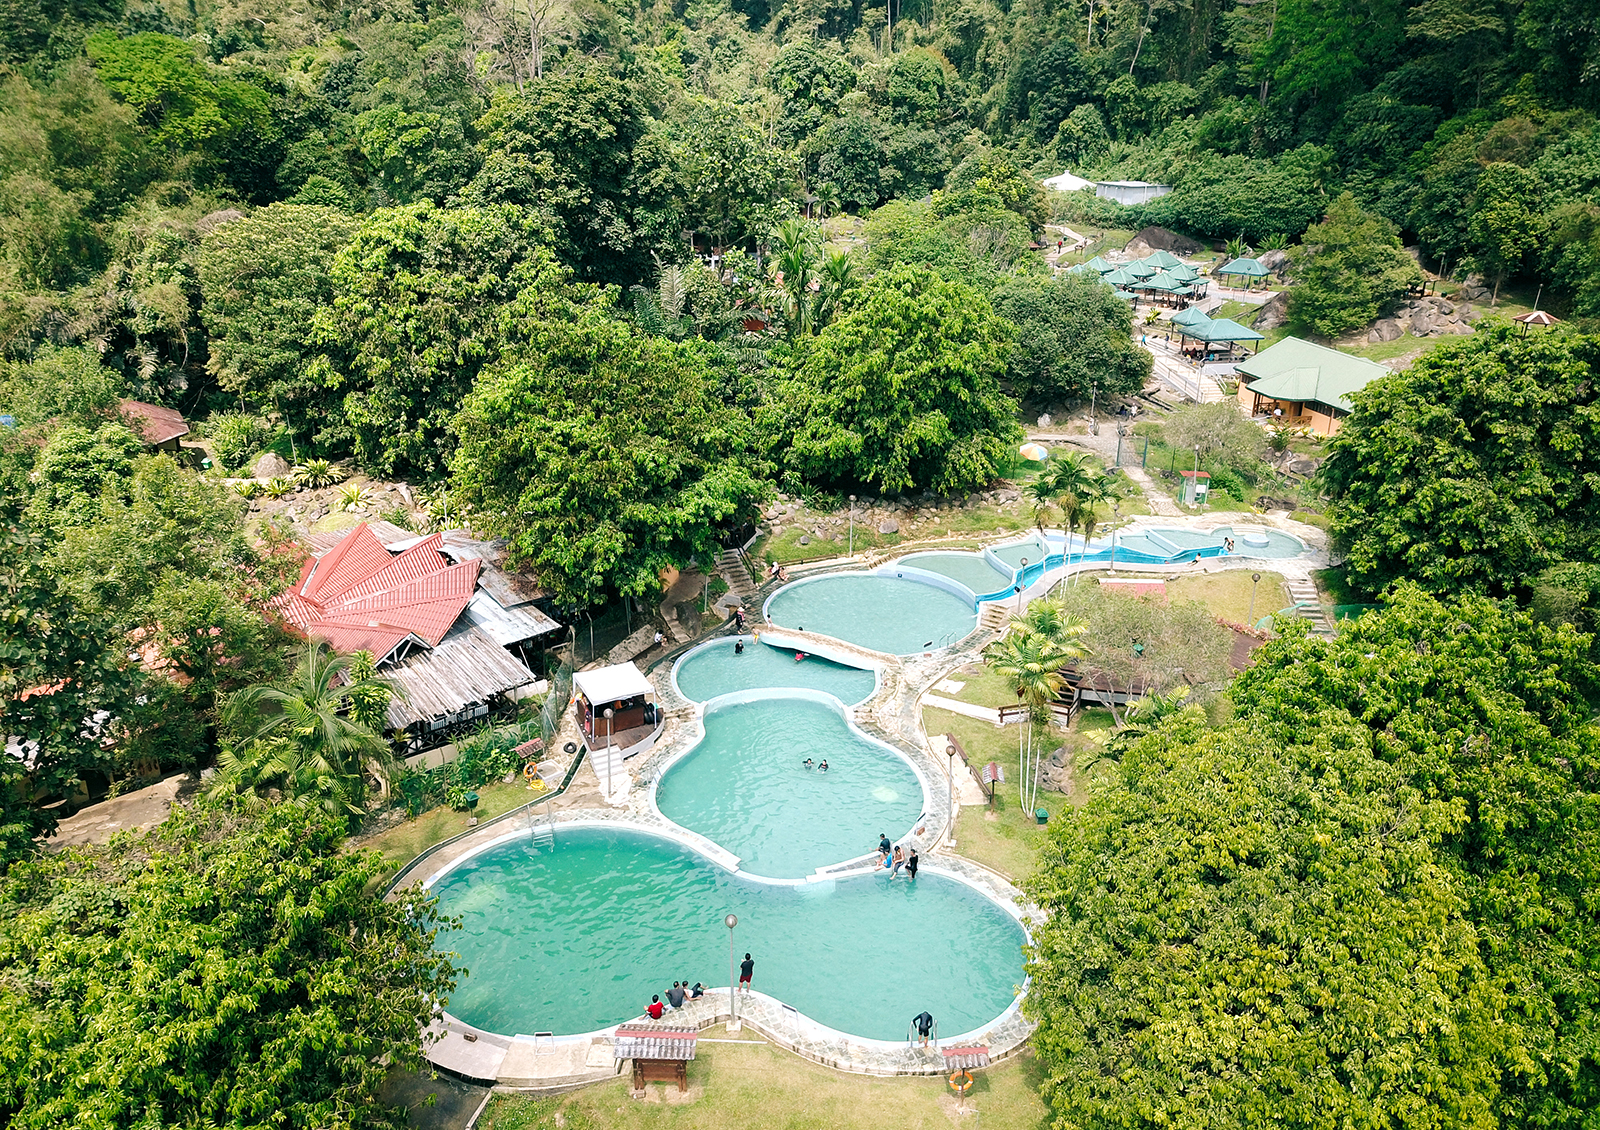 Poring Hot Spring and Nature Reserve